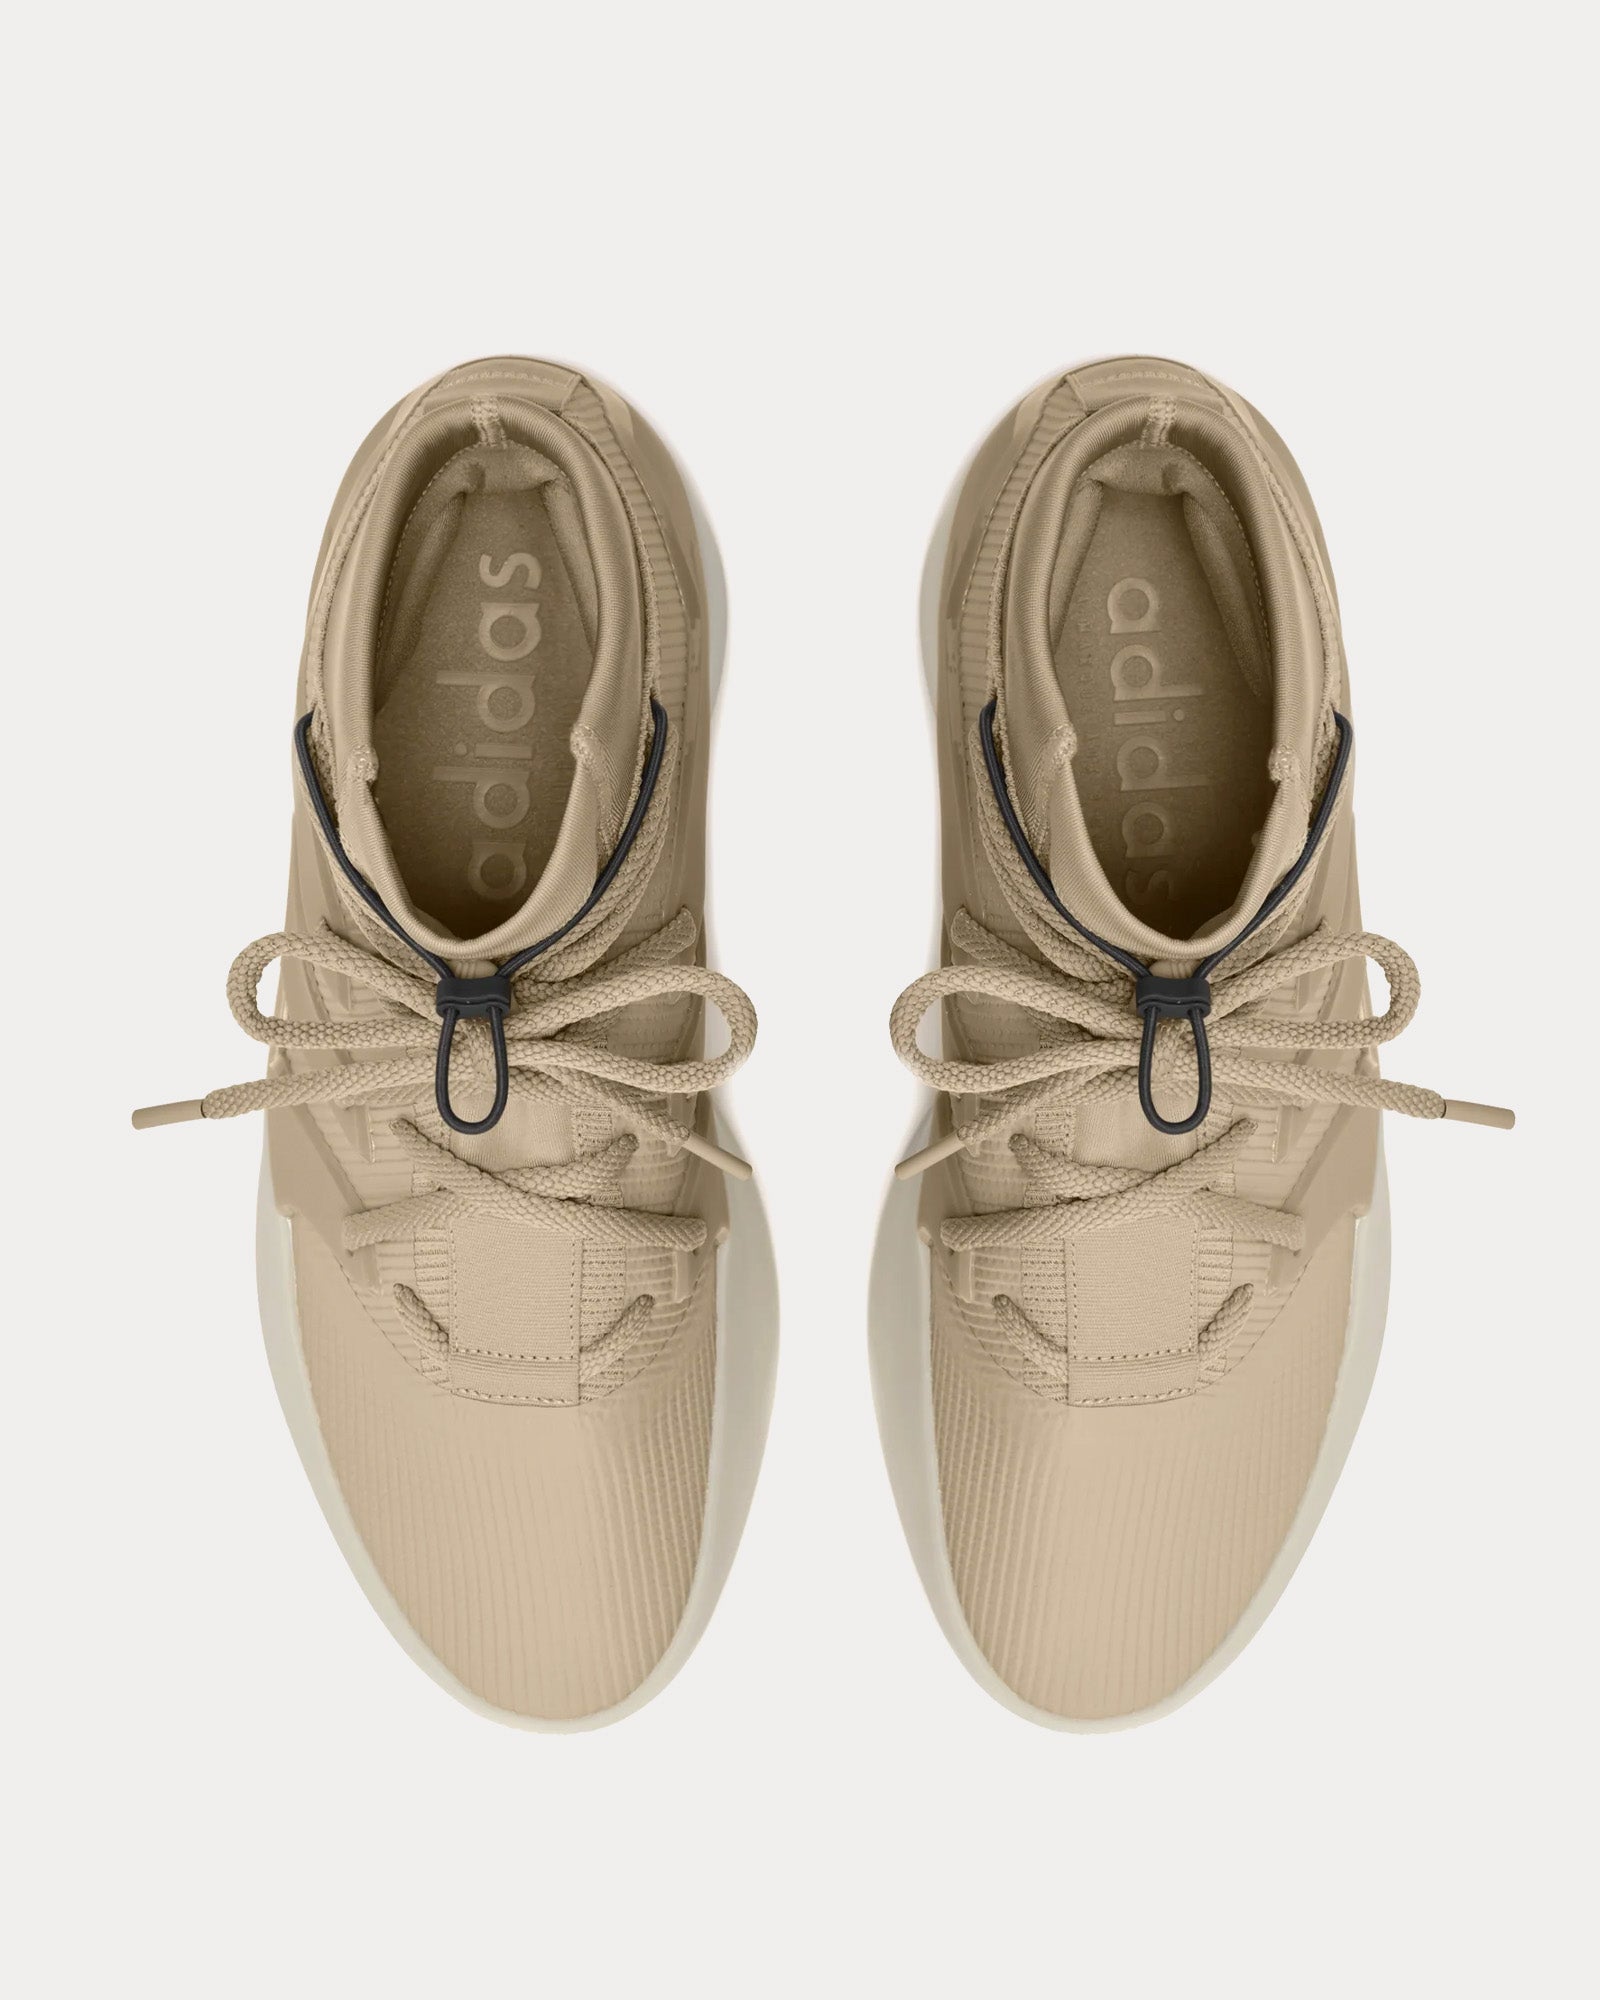 Fear of God Athletics - One Model Clay High Top Sneakers